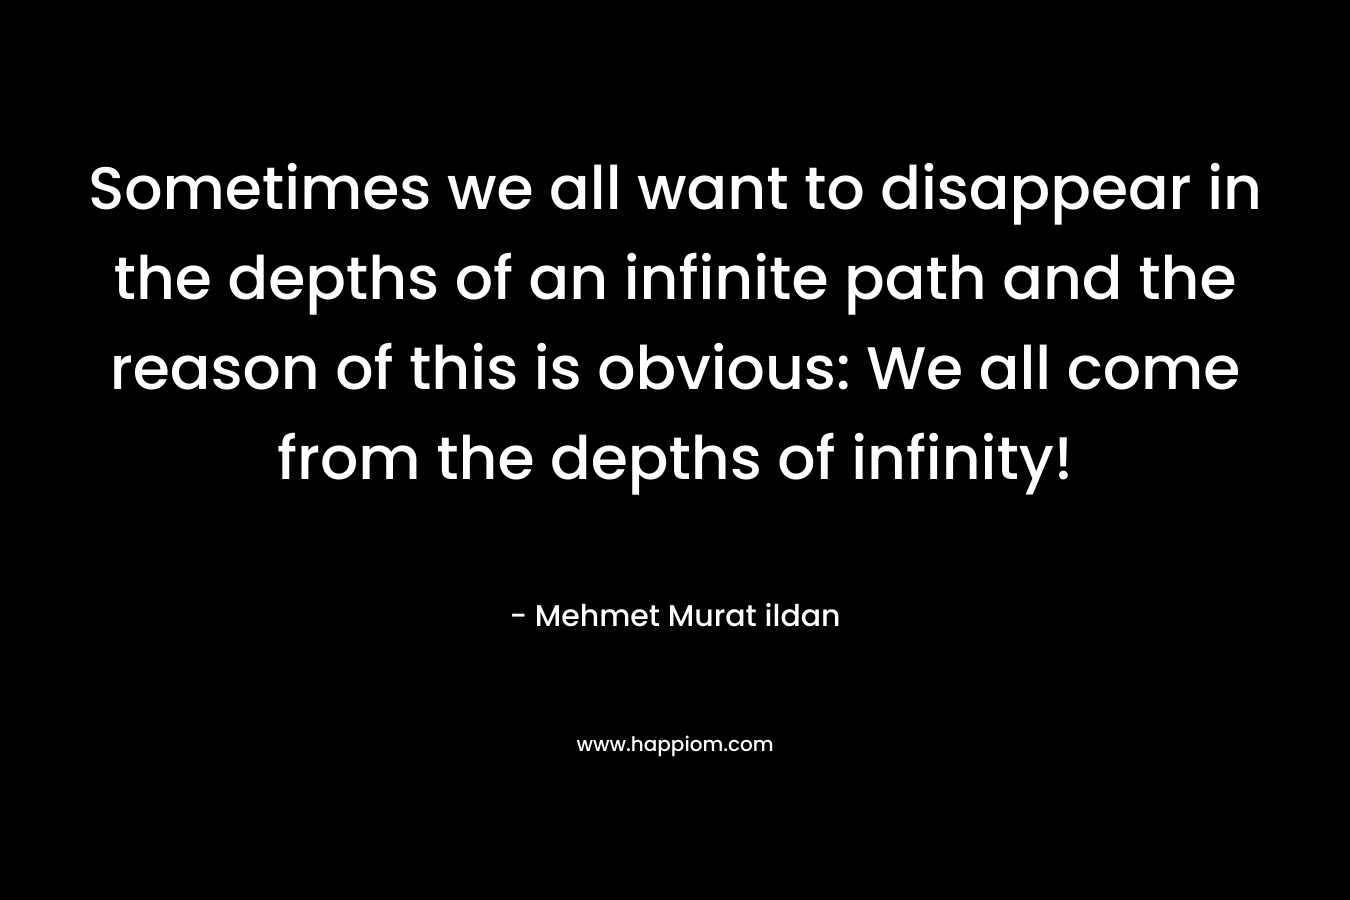 Sometimes we all want to disappear in the depths of an infinite path and the reason of this is obvious: We all come from the depths of infinity! – Mehmet Murat ildan